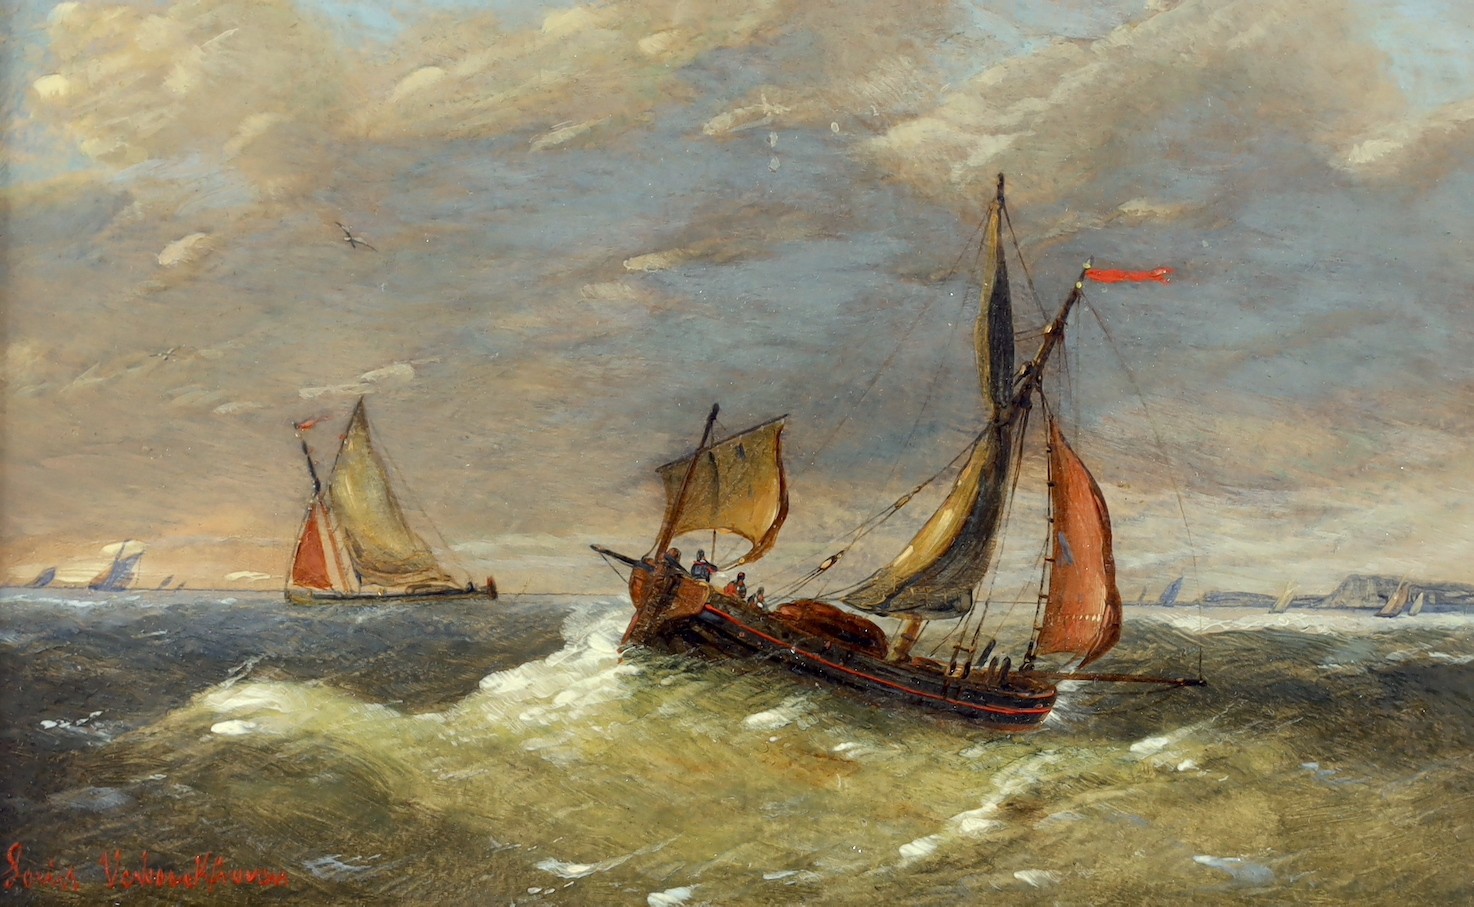 Charles-Louis Verboeckhoven (Dutch, 1802–1889), Shipping at sea, oil on panel, 14.5 x 23.5cm                                                                                                                                